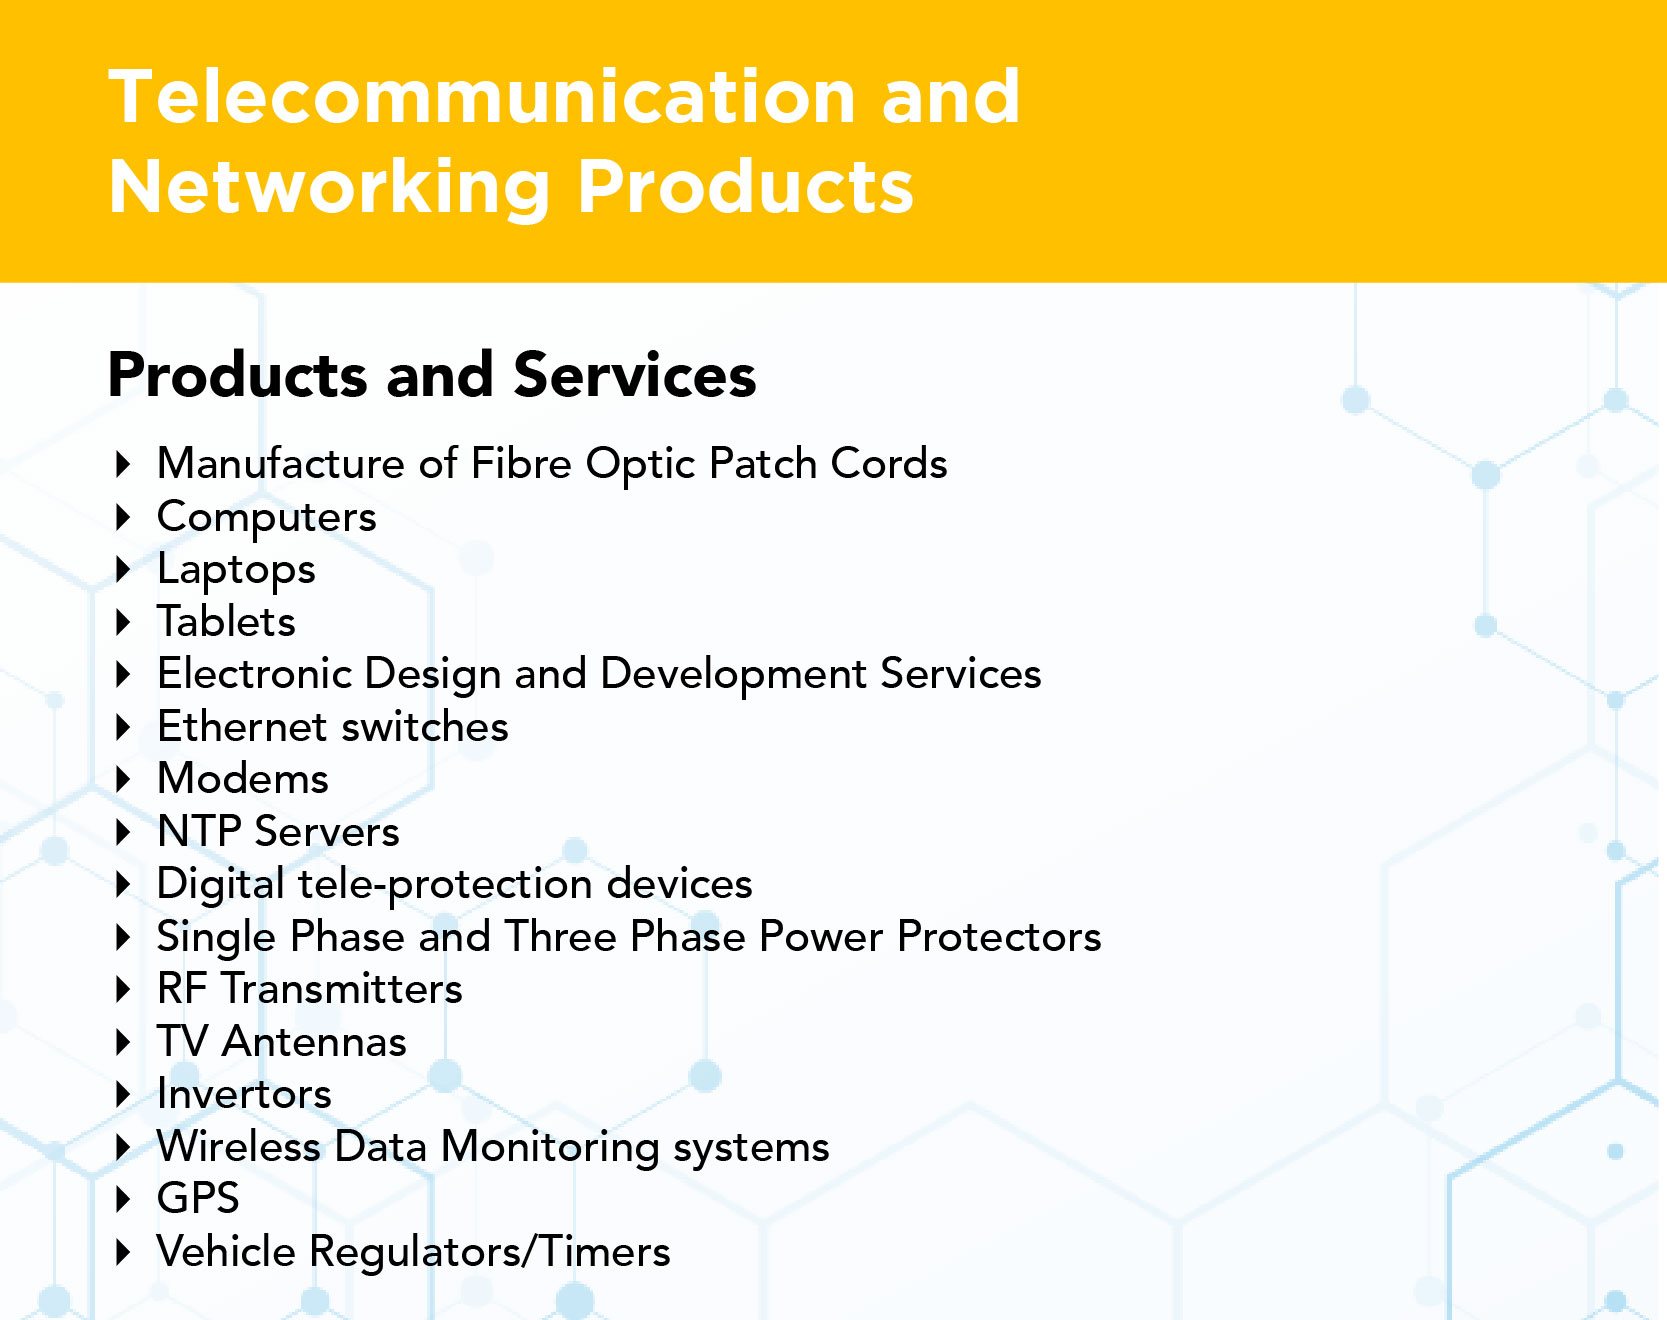 Telecommunication and Networking Products